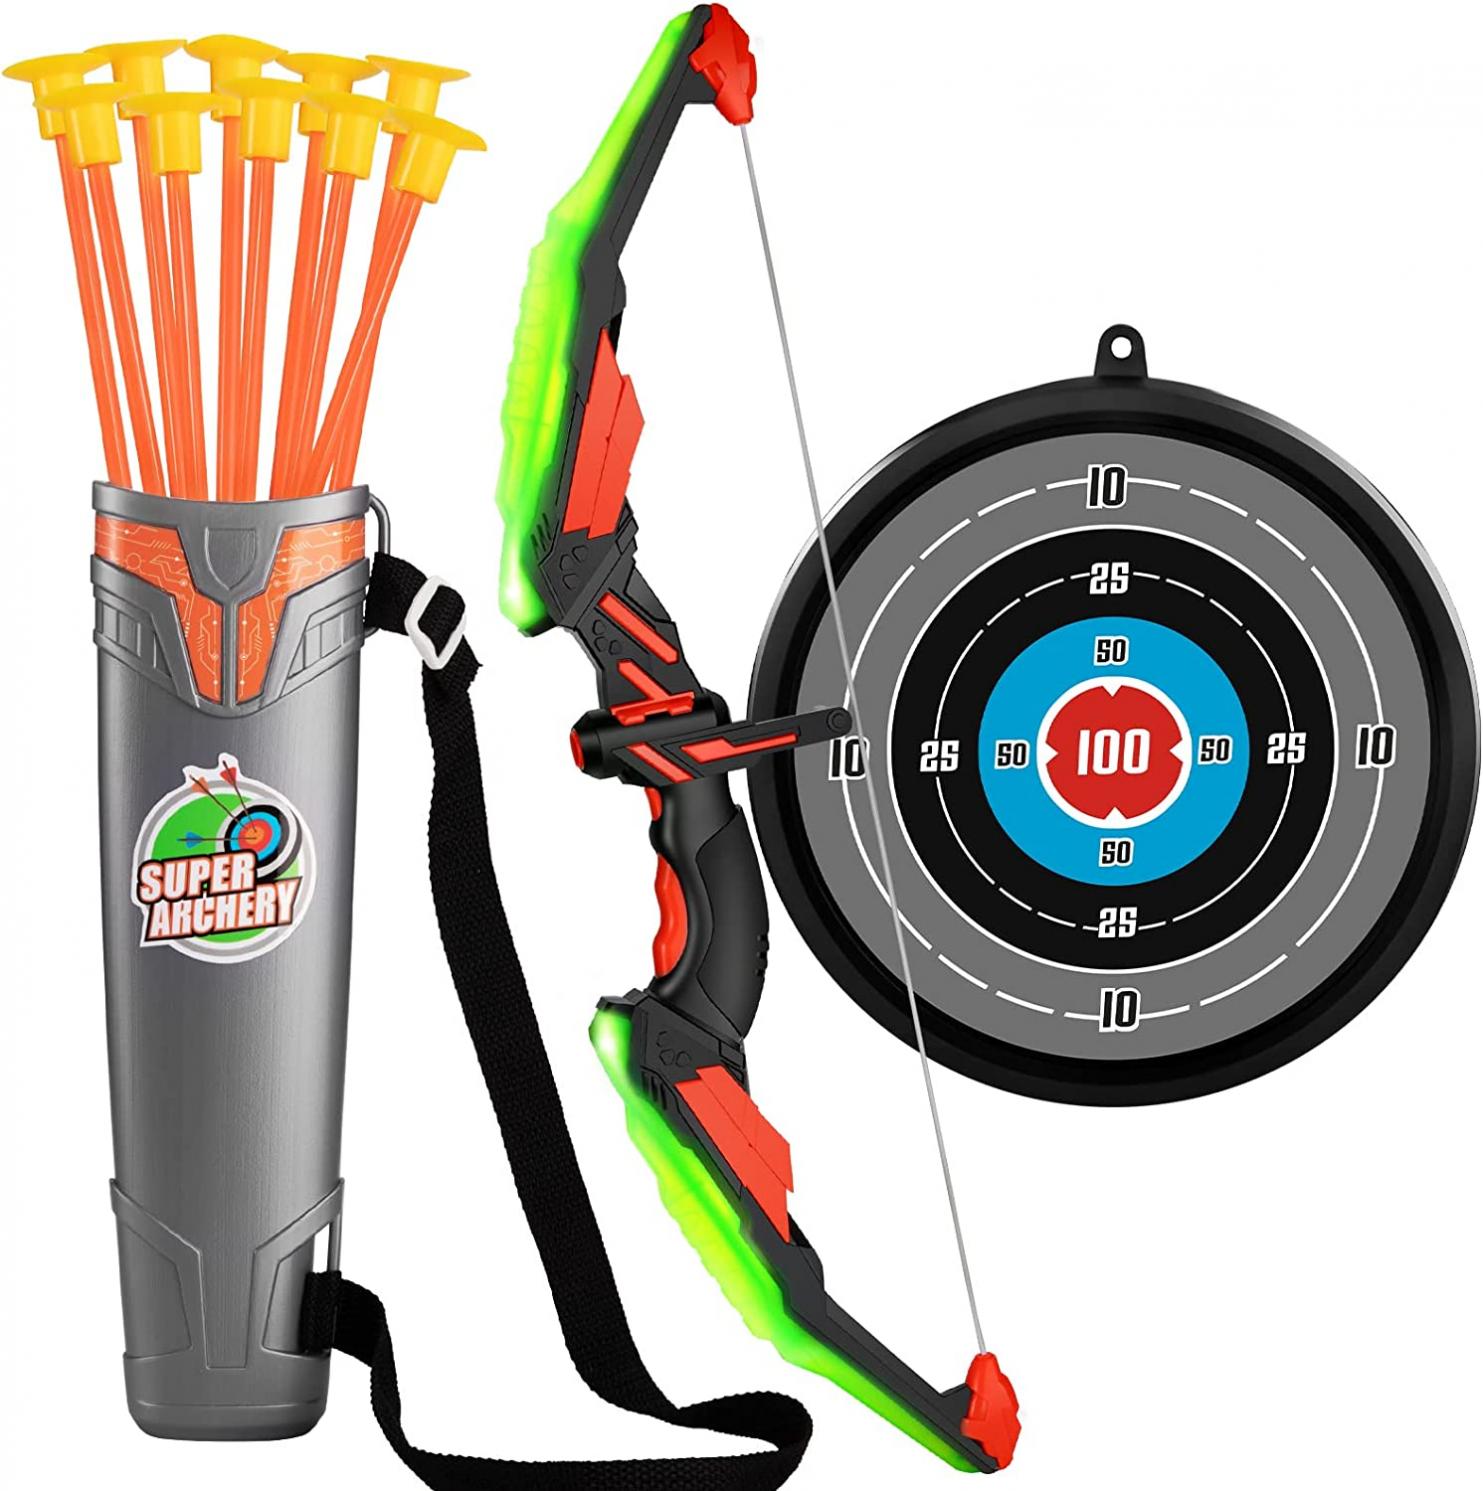 TEMI Kids Bow and Arrow Set - LED Light Up Archery Toy Set with 10 Suction Cup Arrows, Target & Quiver, Indoor and Outdoor Toys for Children Boys Girls